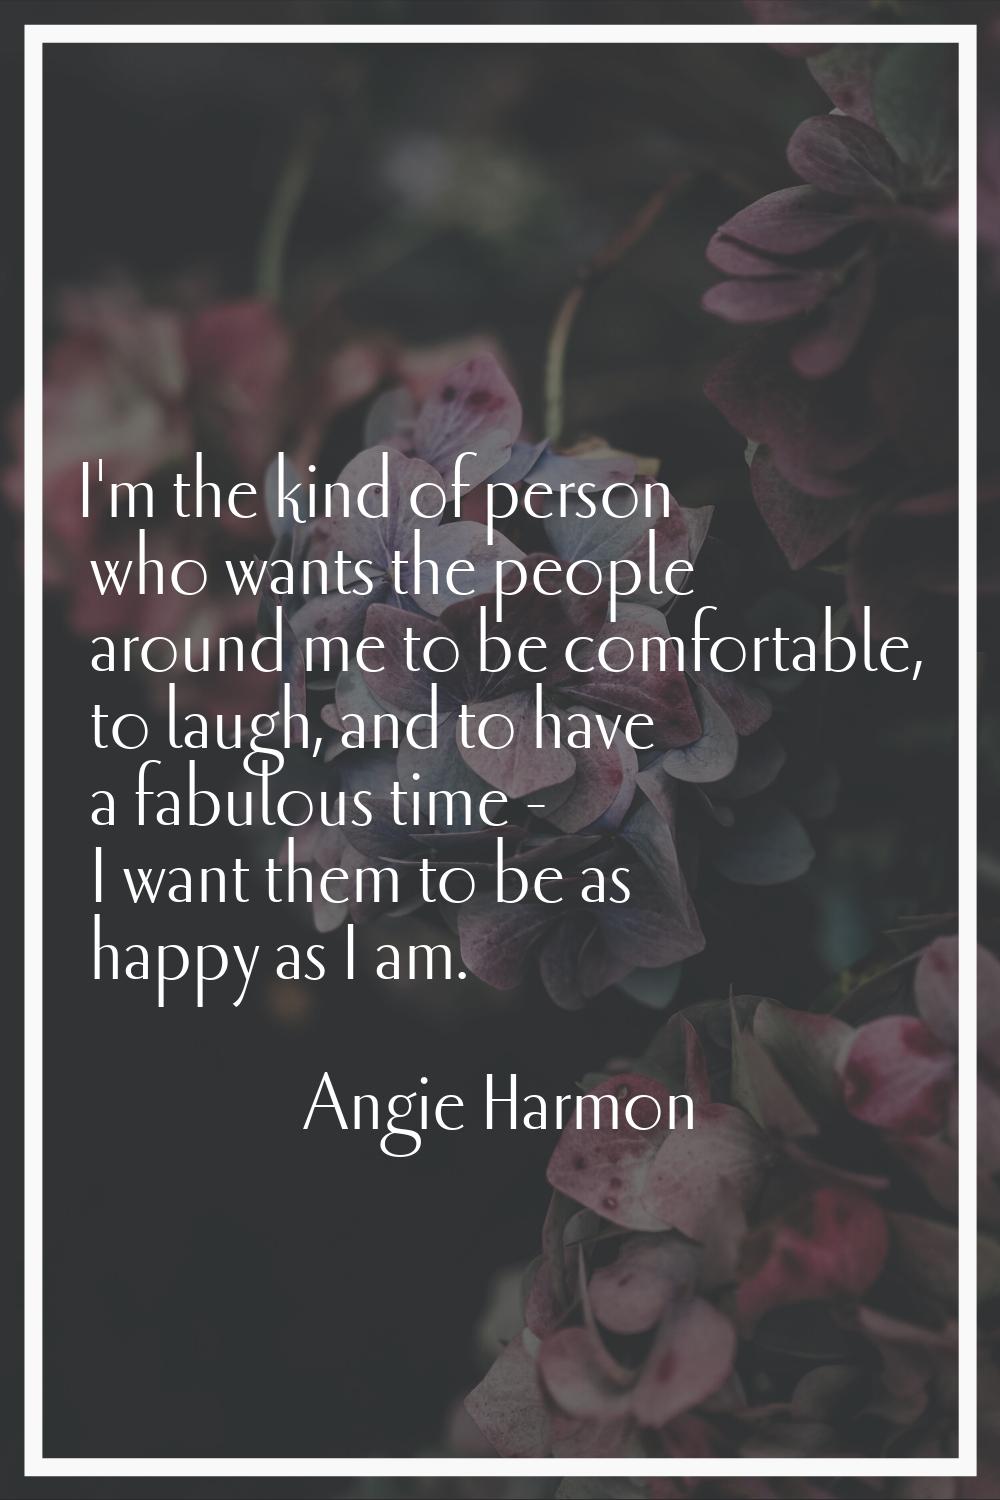 I'm the kind of person who wants the people around me to be comfortable, to laugh, and to have a fa